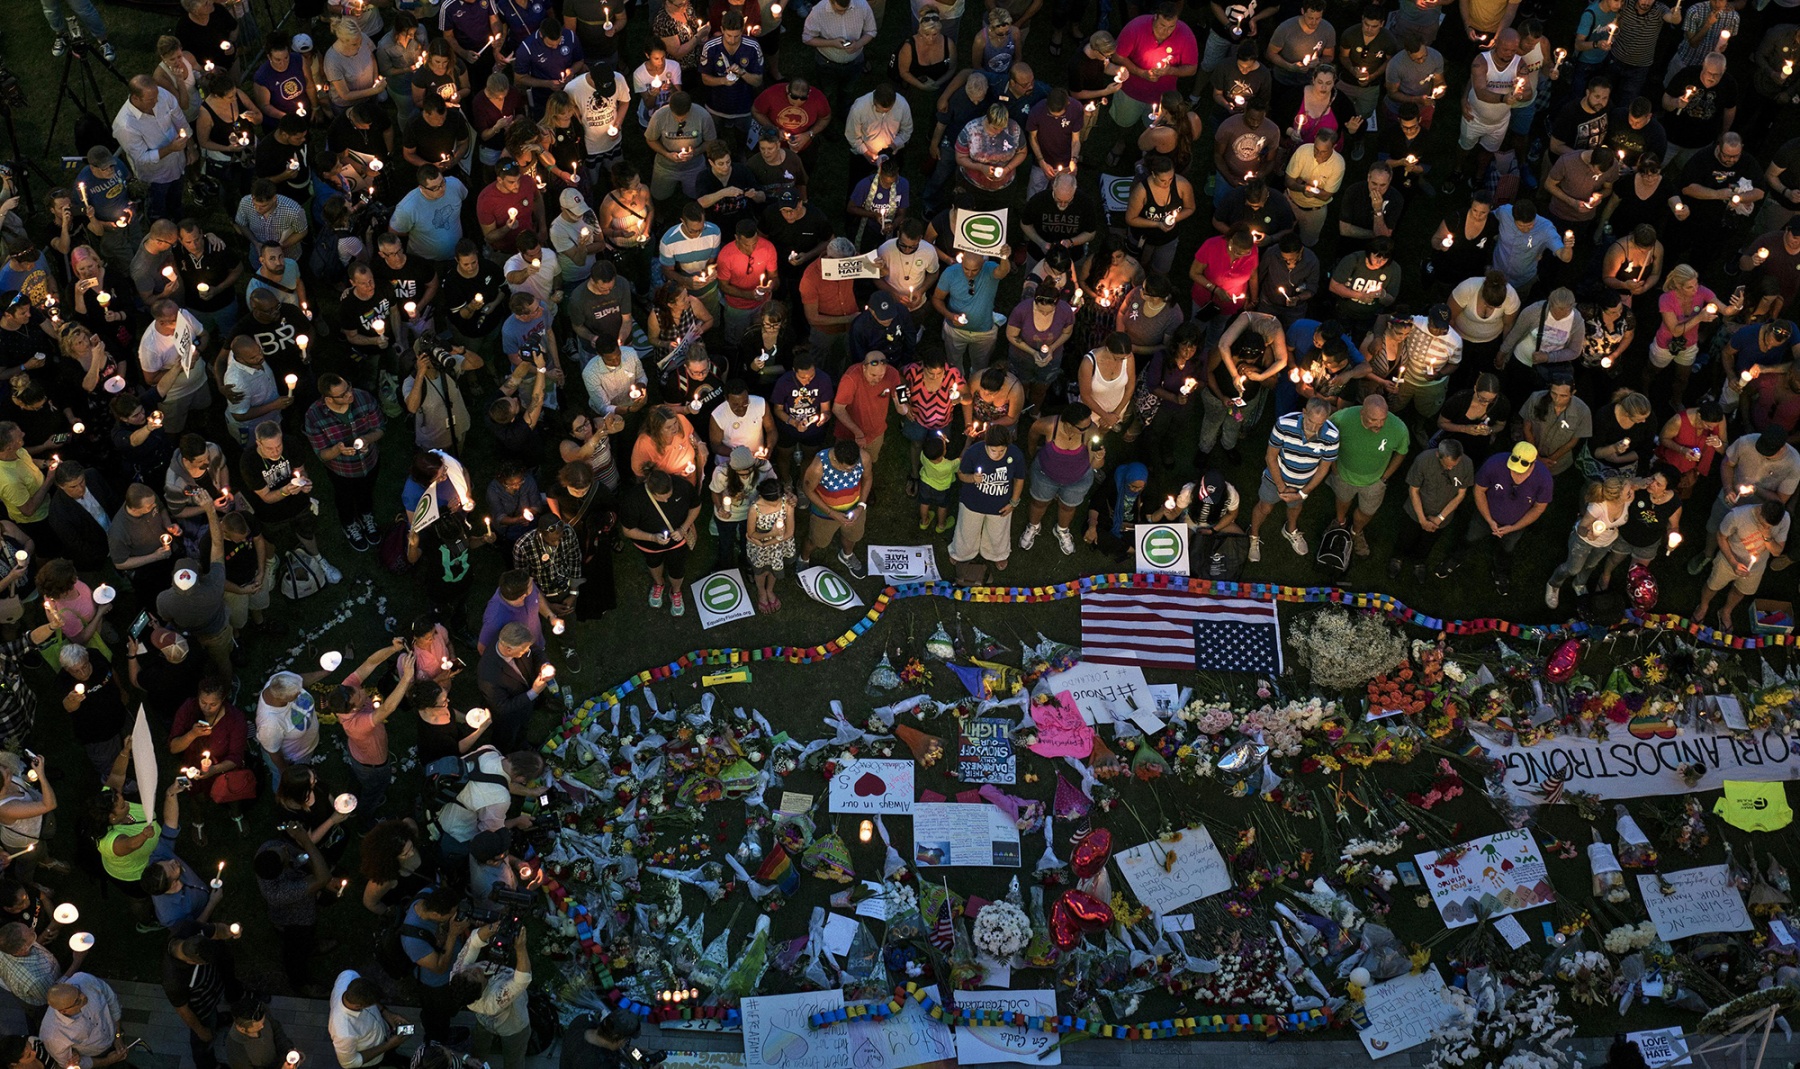 Mourners observe&nbsp;a moment of silence in Orlando, Florida&nbsp;for the mass shooting victims at the Pulse nightclub in&nbsp;2016.